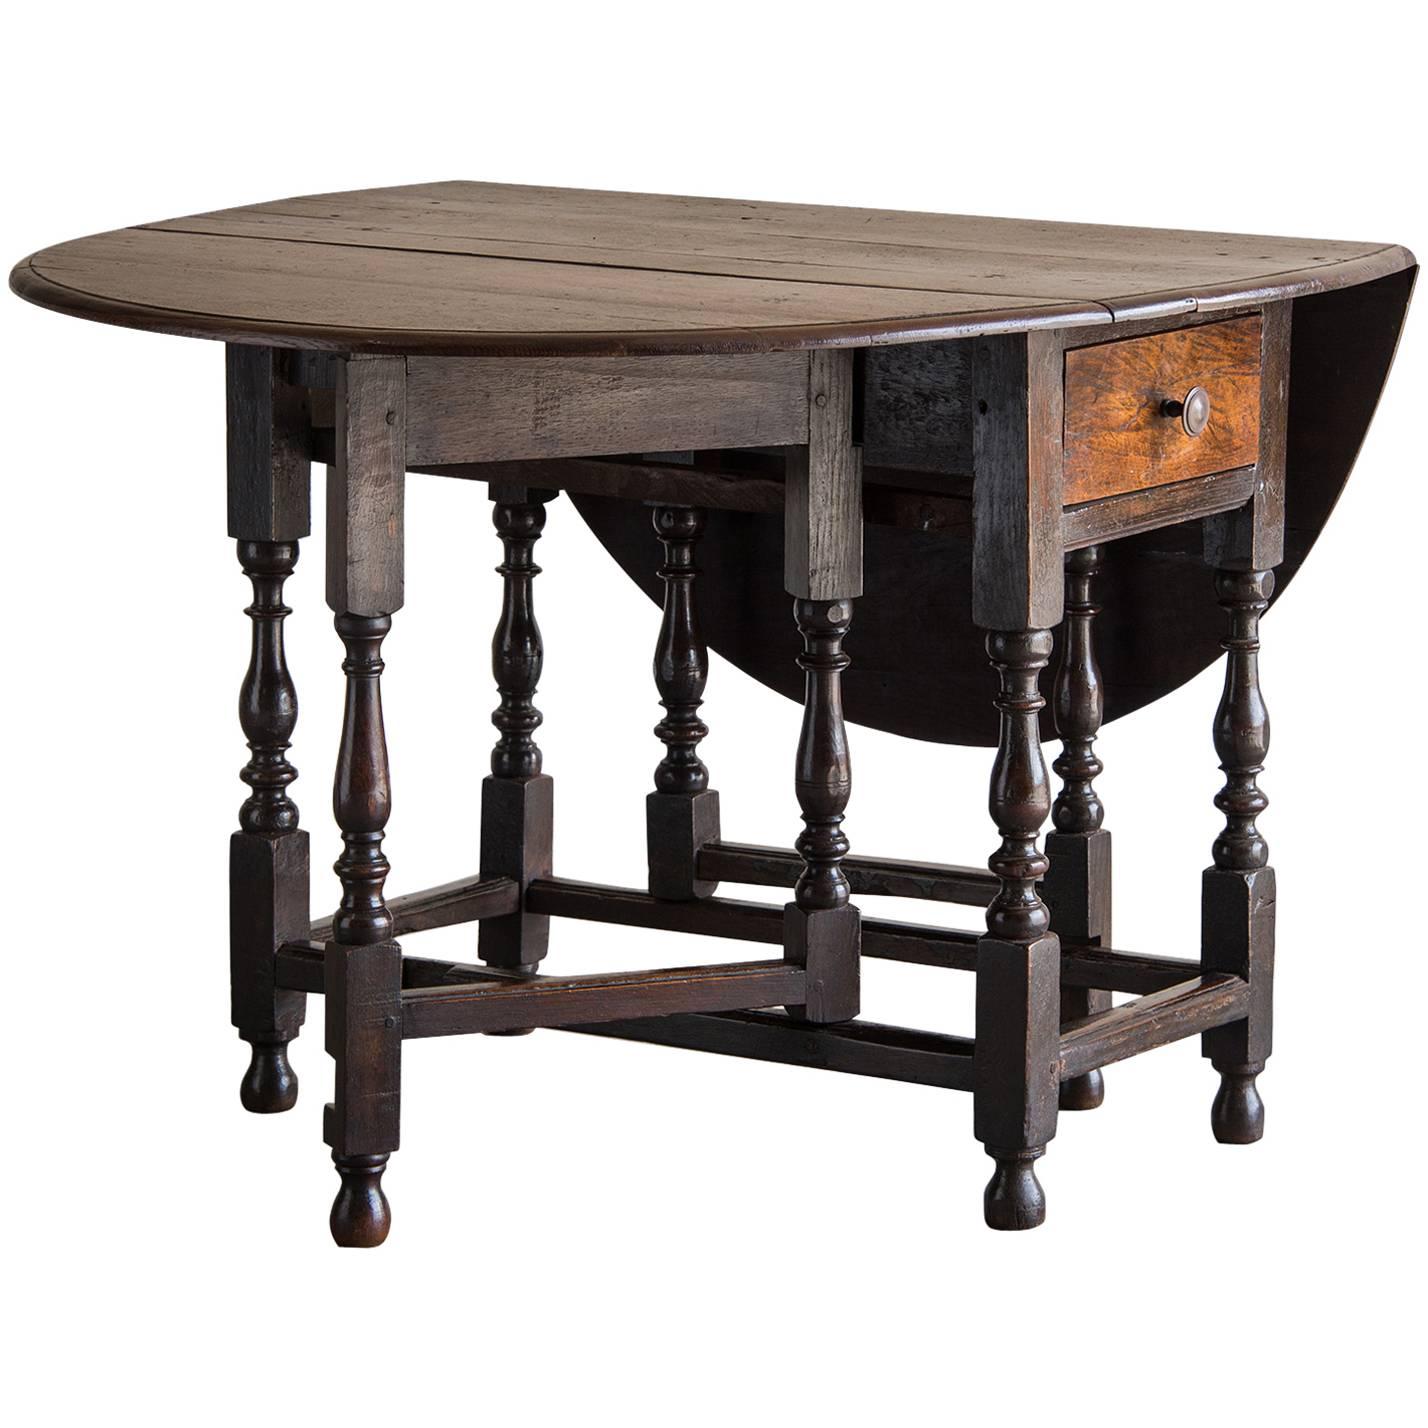 Antique English George III Oak Drop Leaf Table with Drawer, circa 1790 For Sale